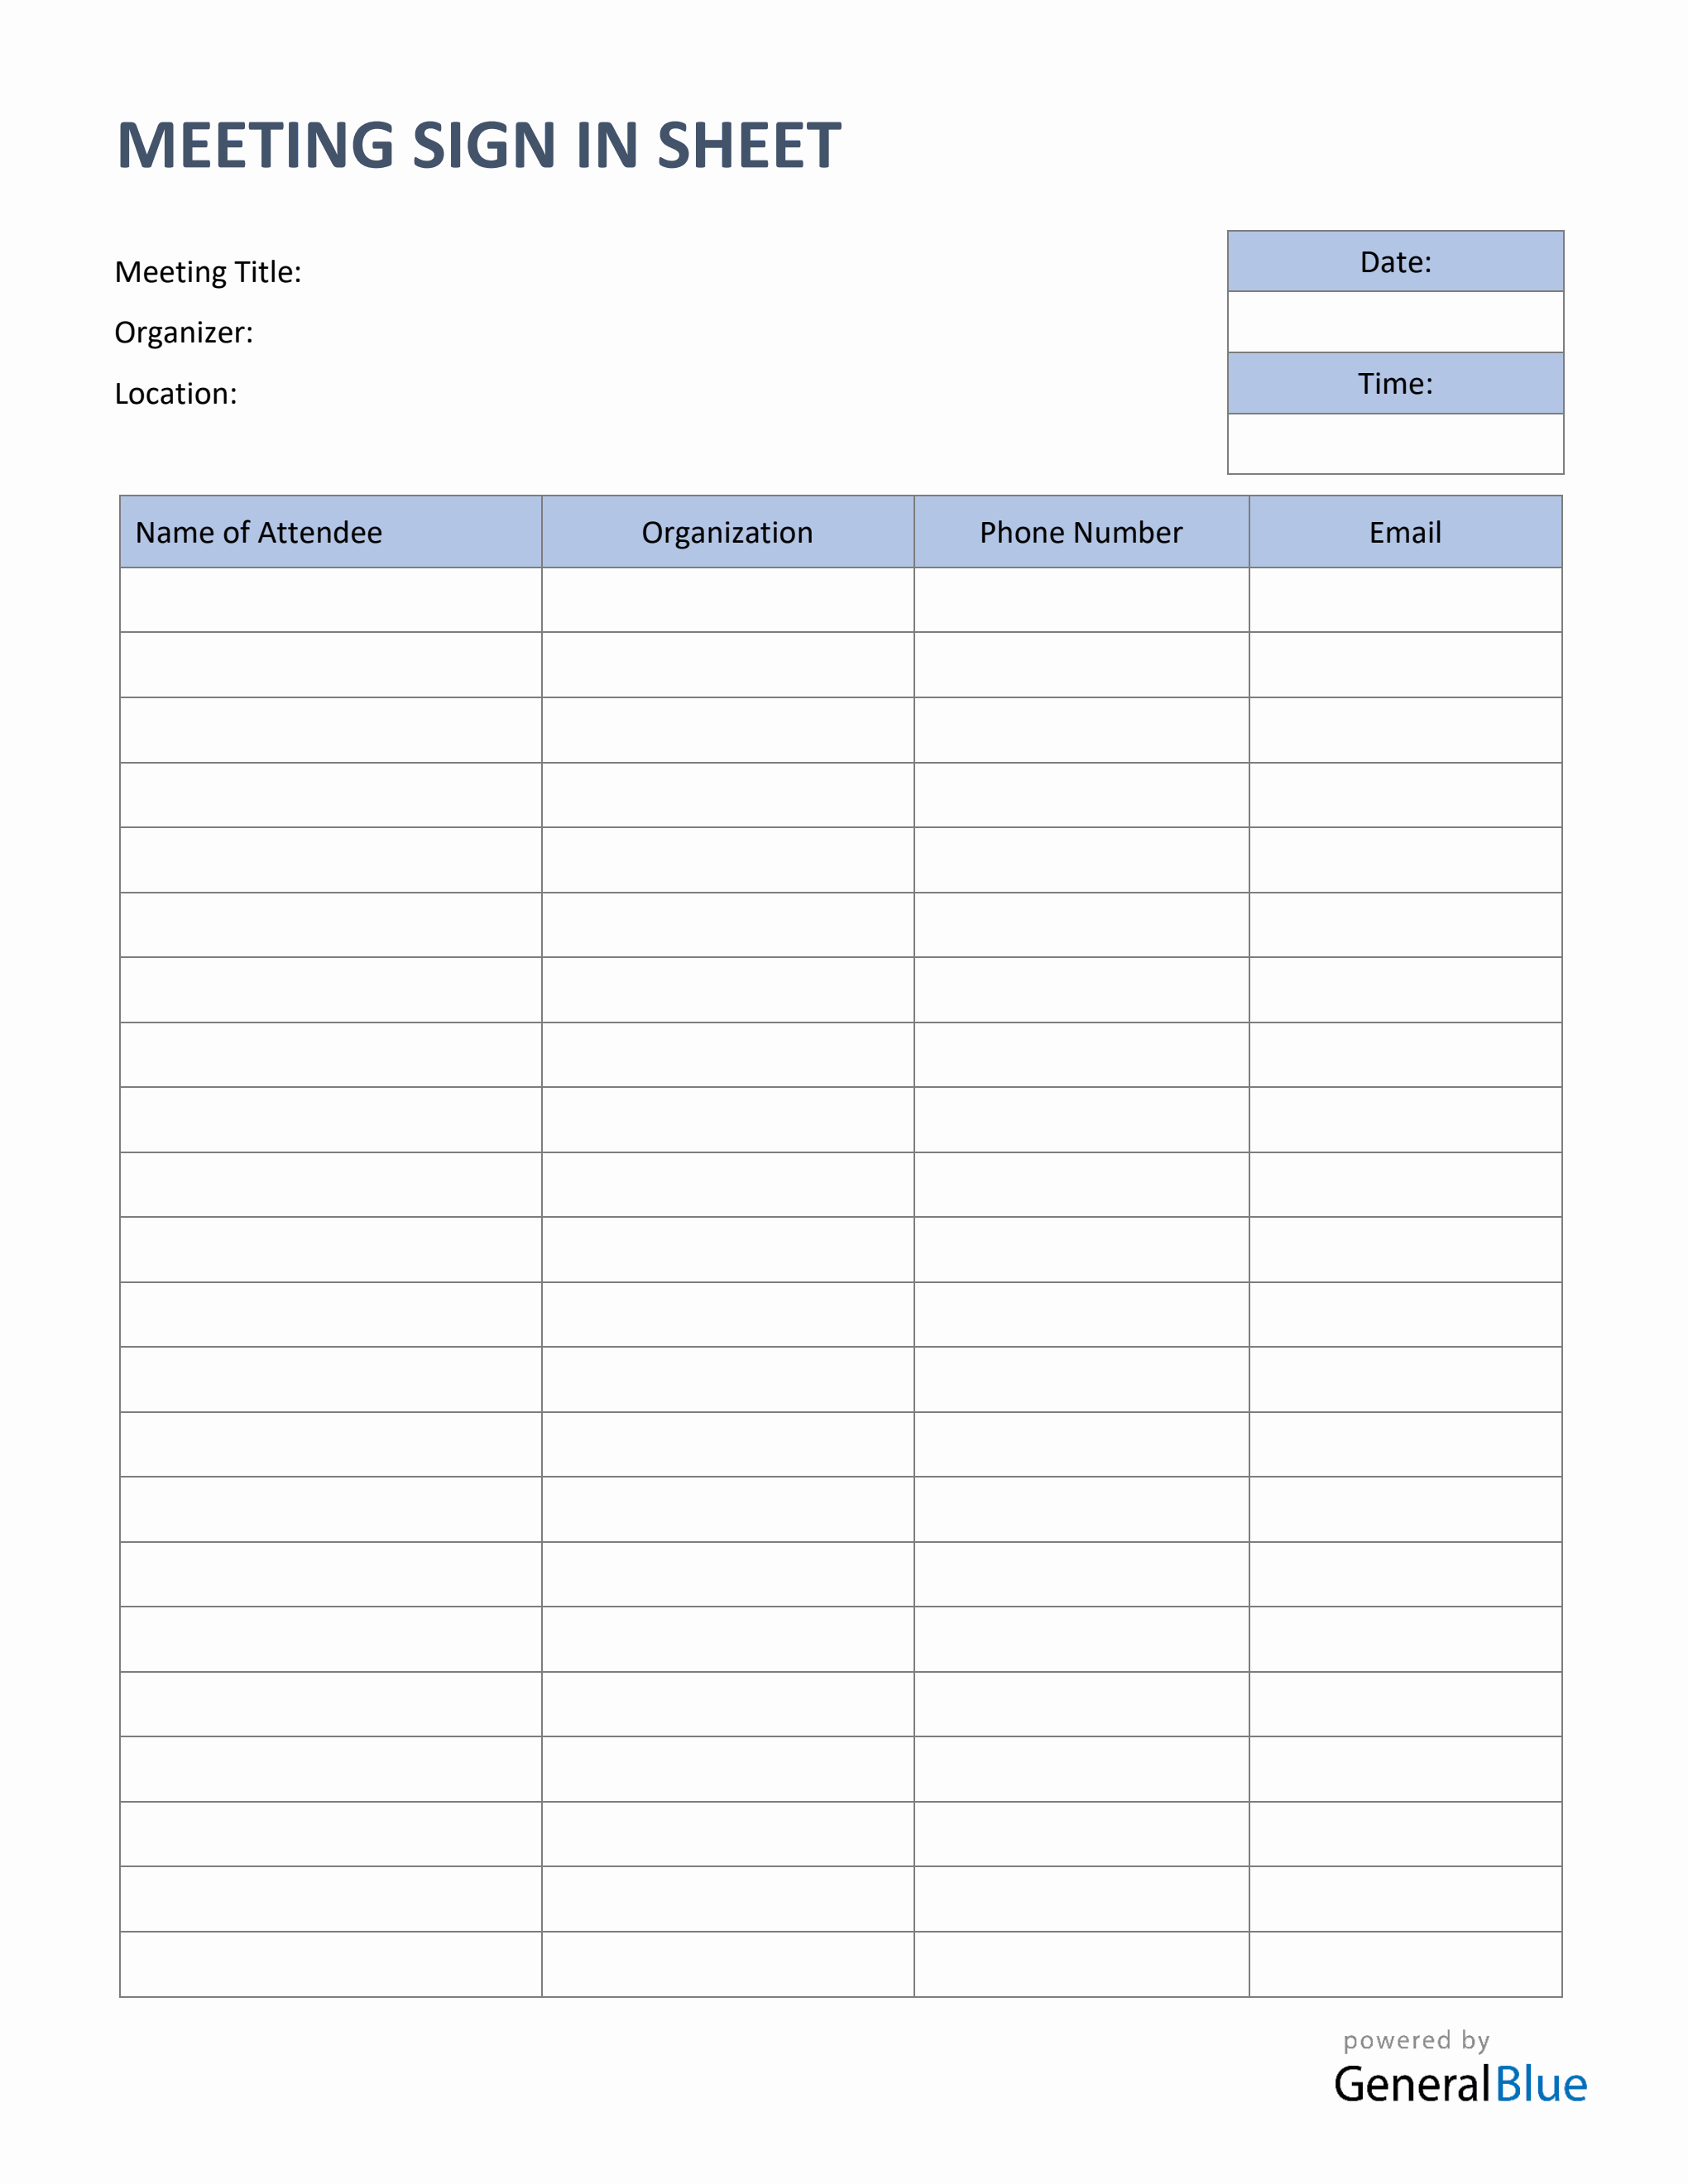 meeting-sign-in-sheet-in-word